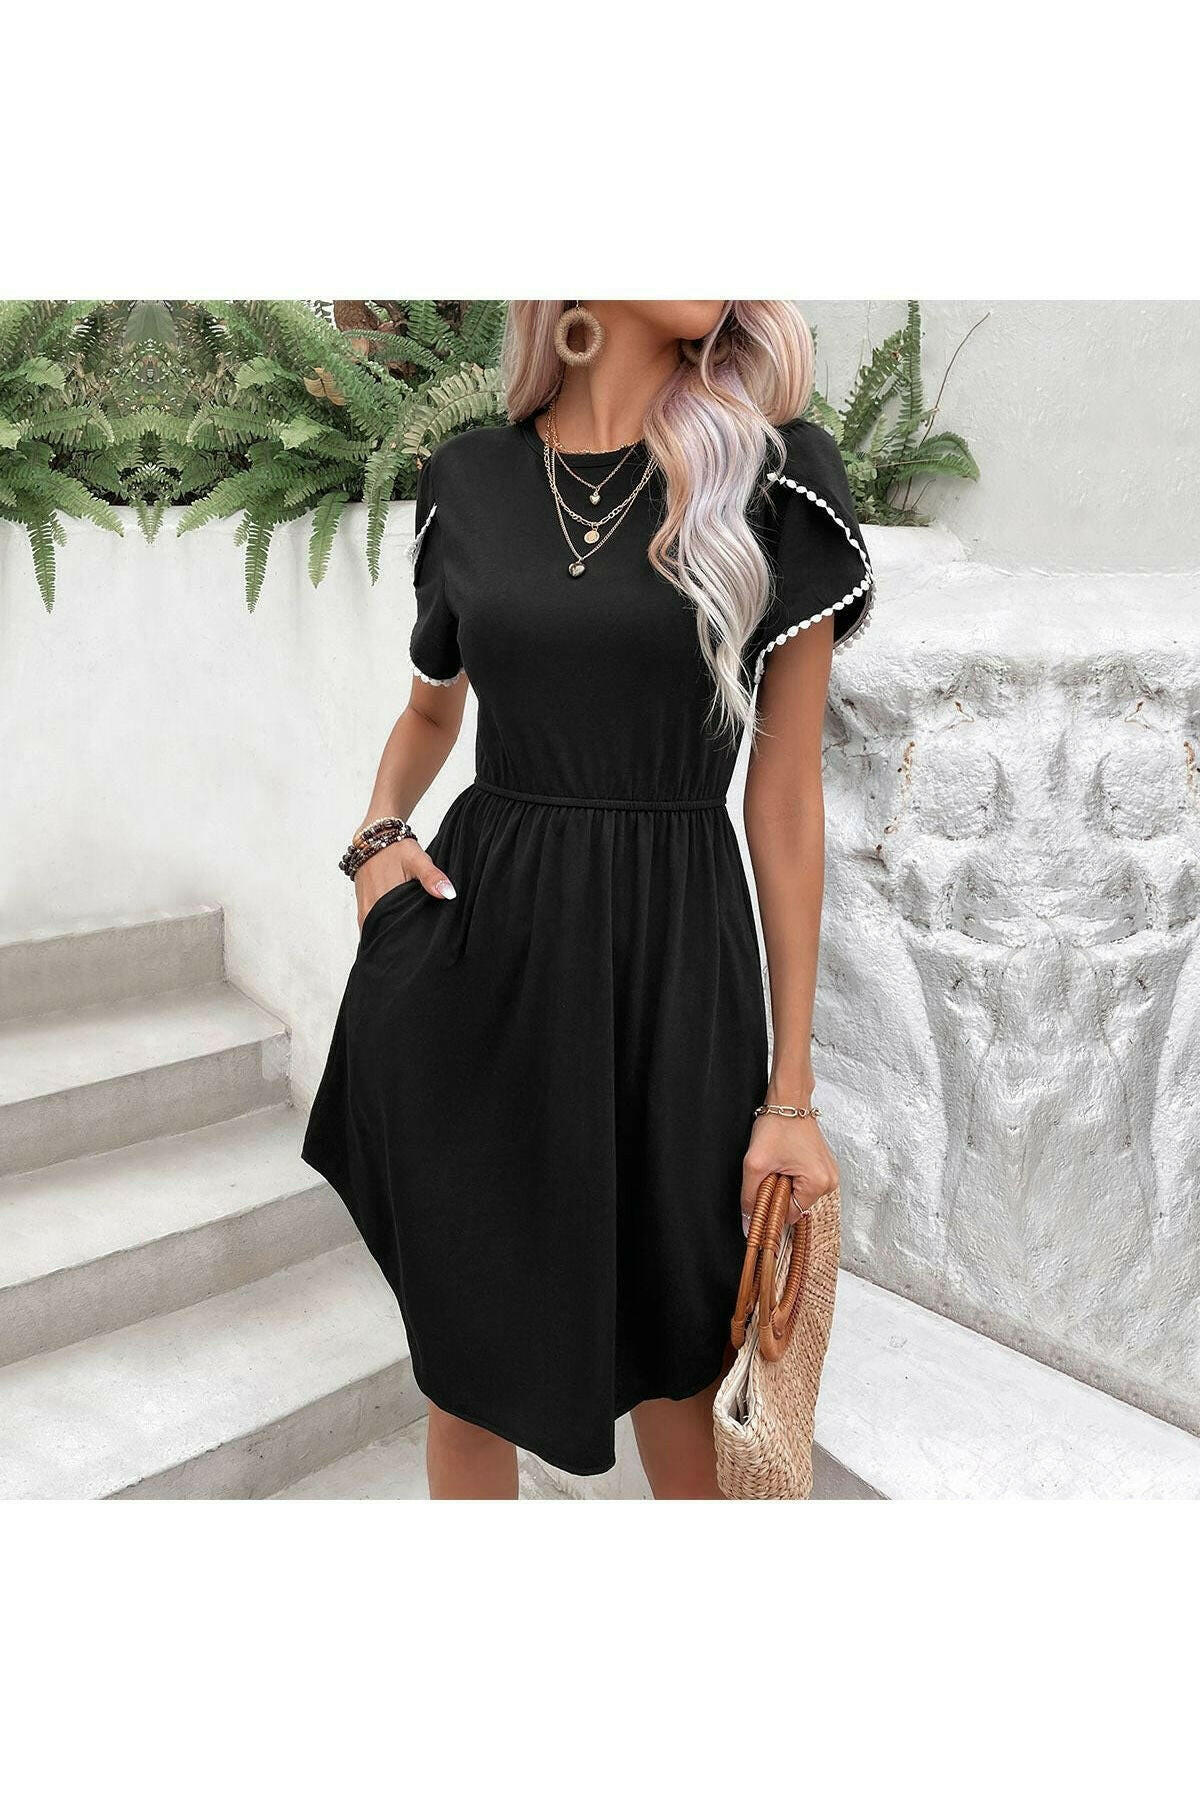 Round Neck Petal Sleeve Dress with Pockets.